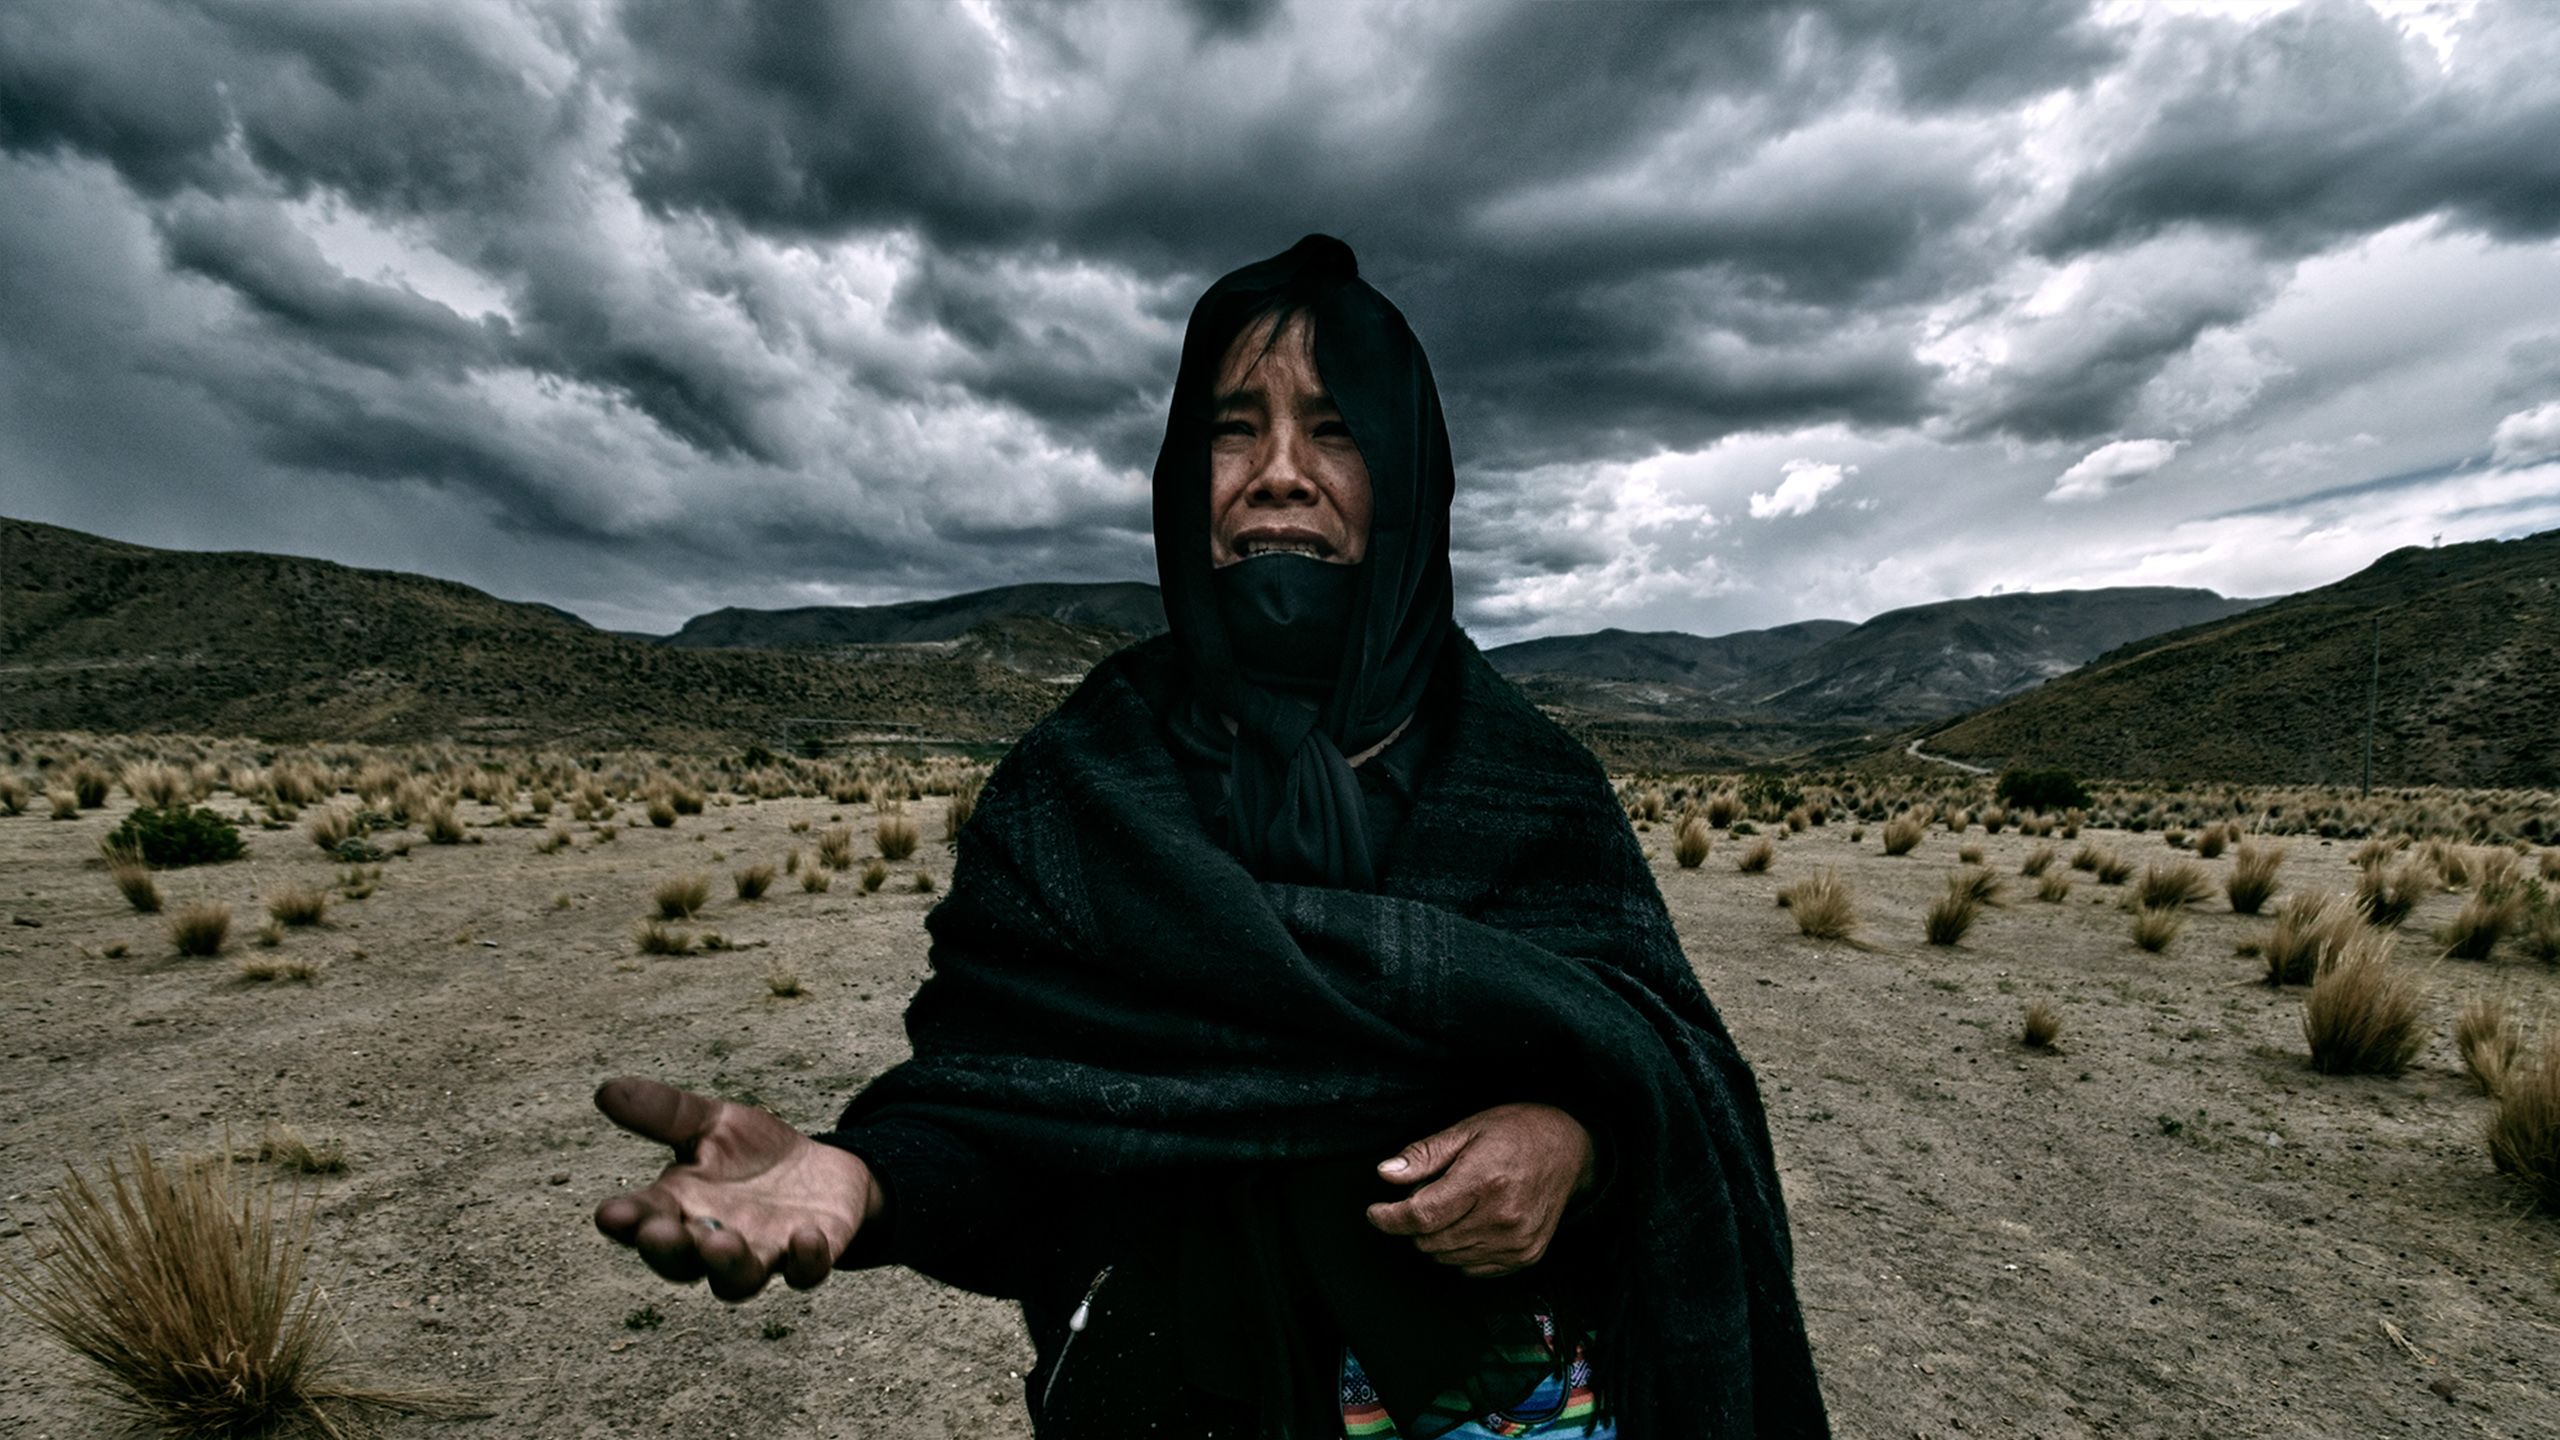 A Bolivian woman in traditional mourning dress stretches out her hands accusingly before a cloudy sky and barren landscape.